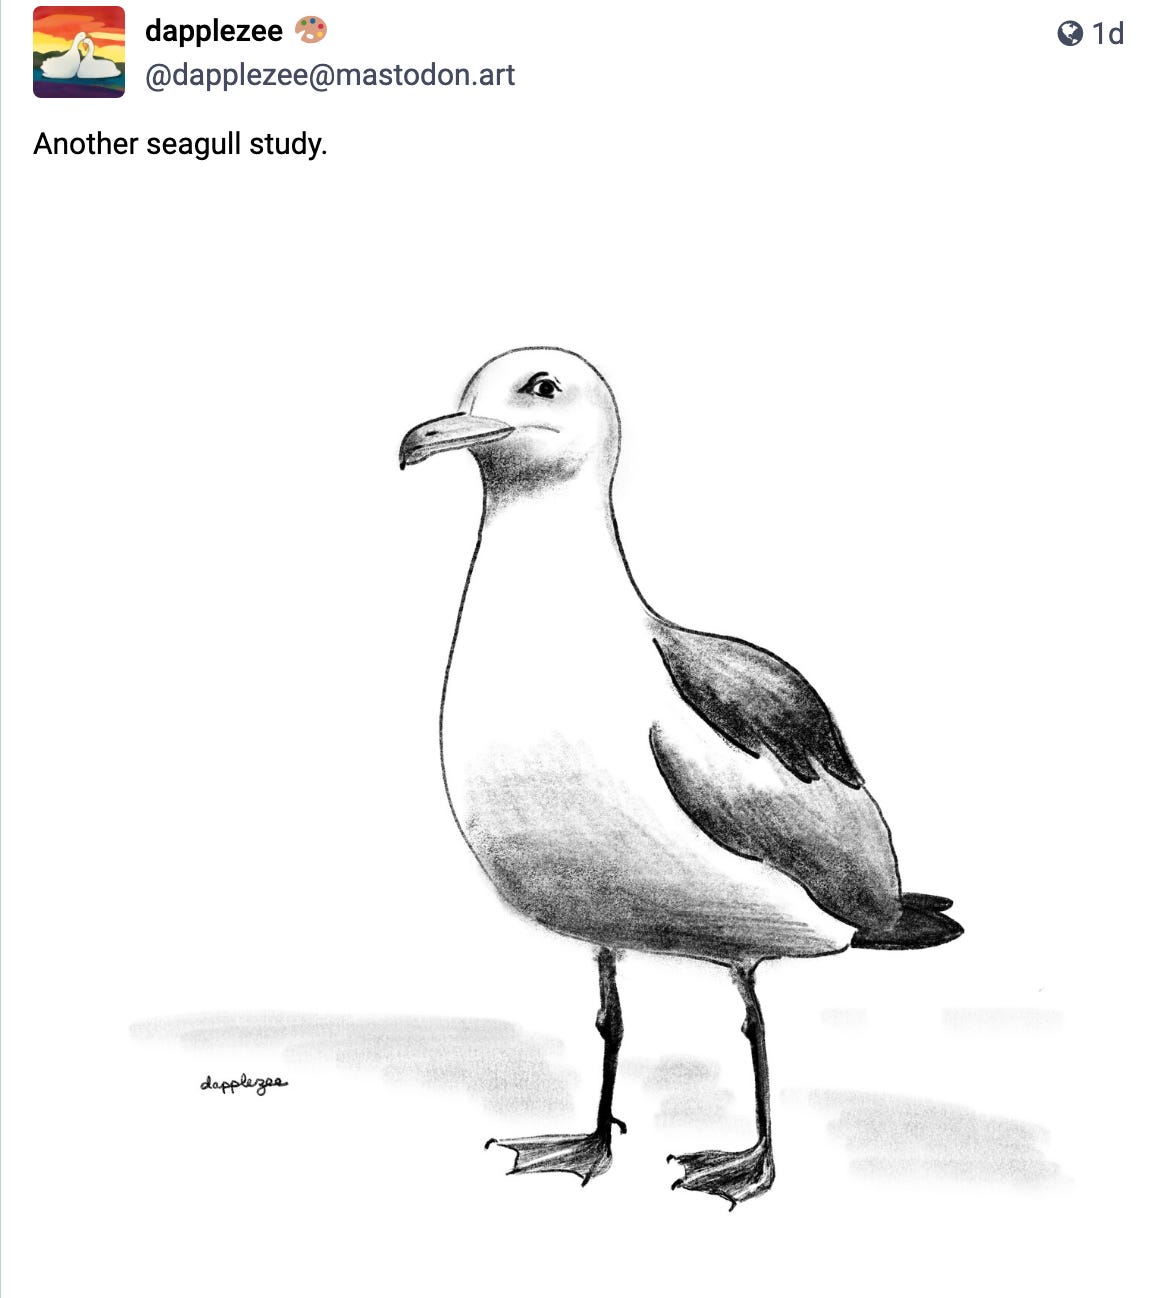 Another seagull study